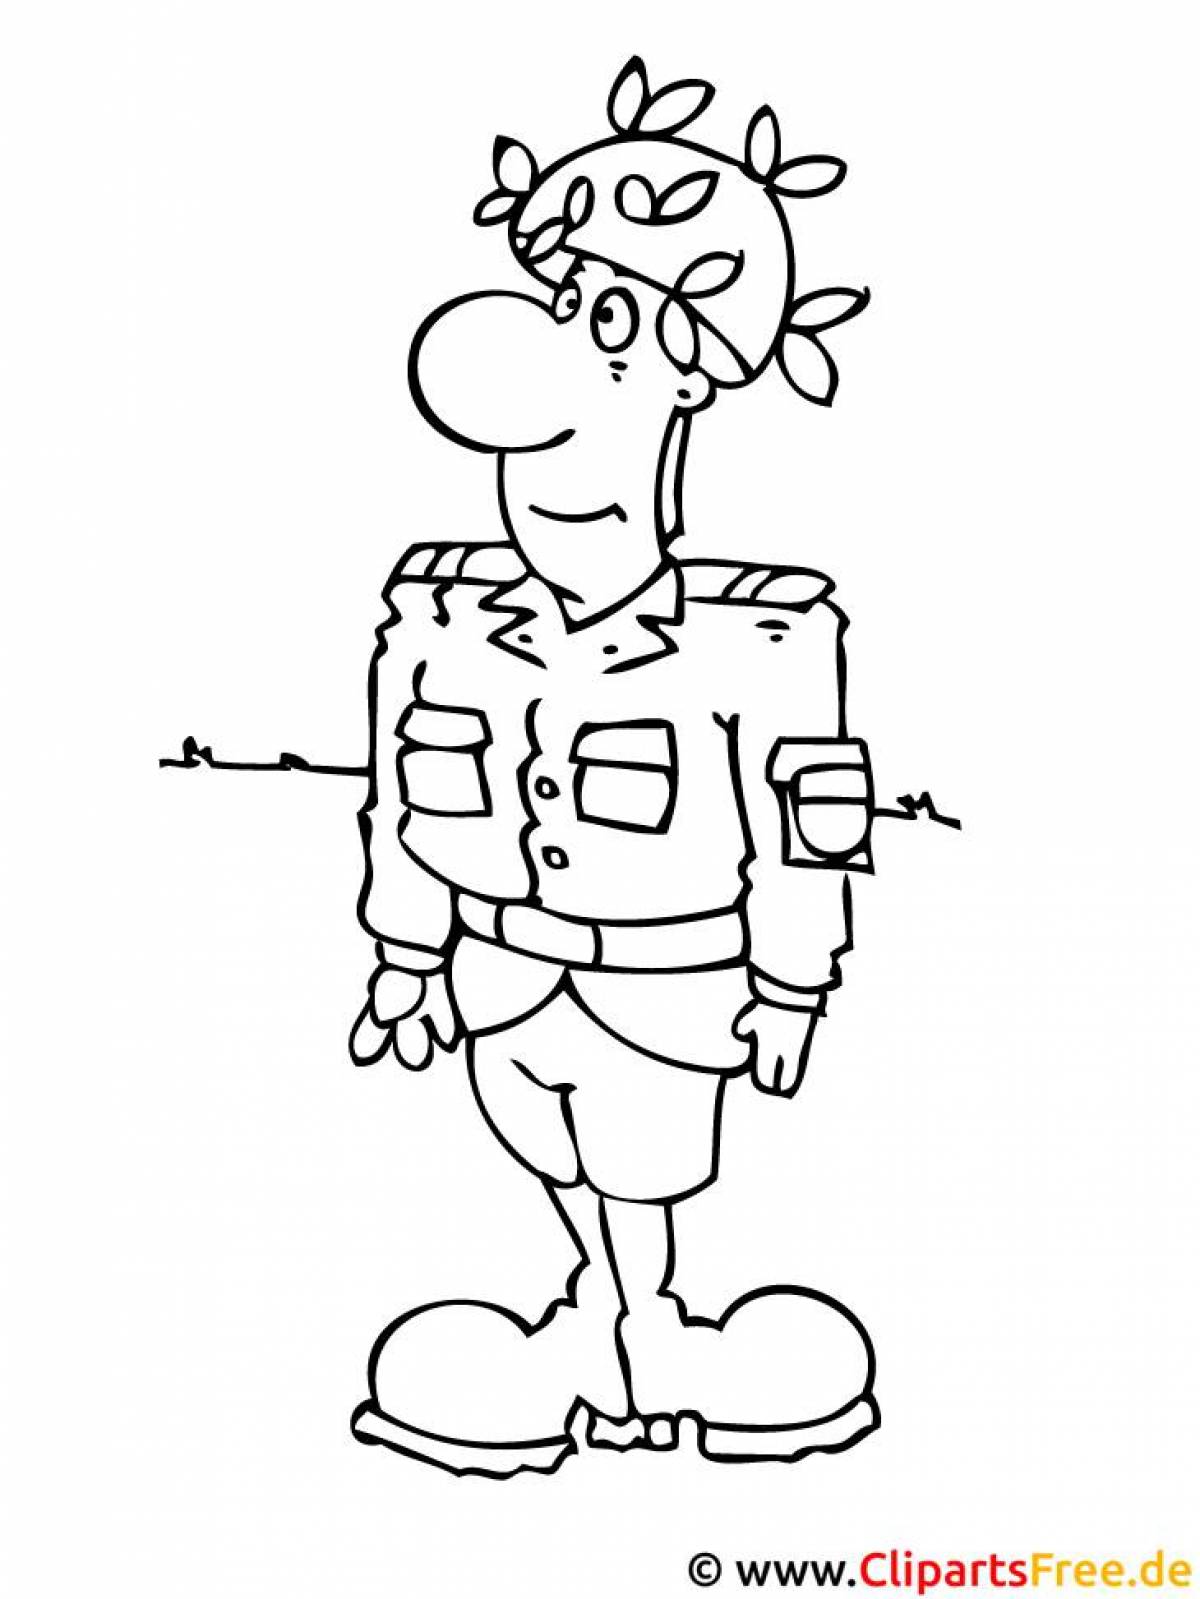 Cute soldier coloring book for kids